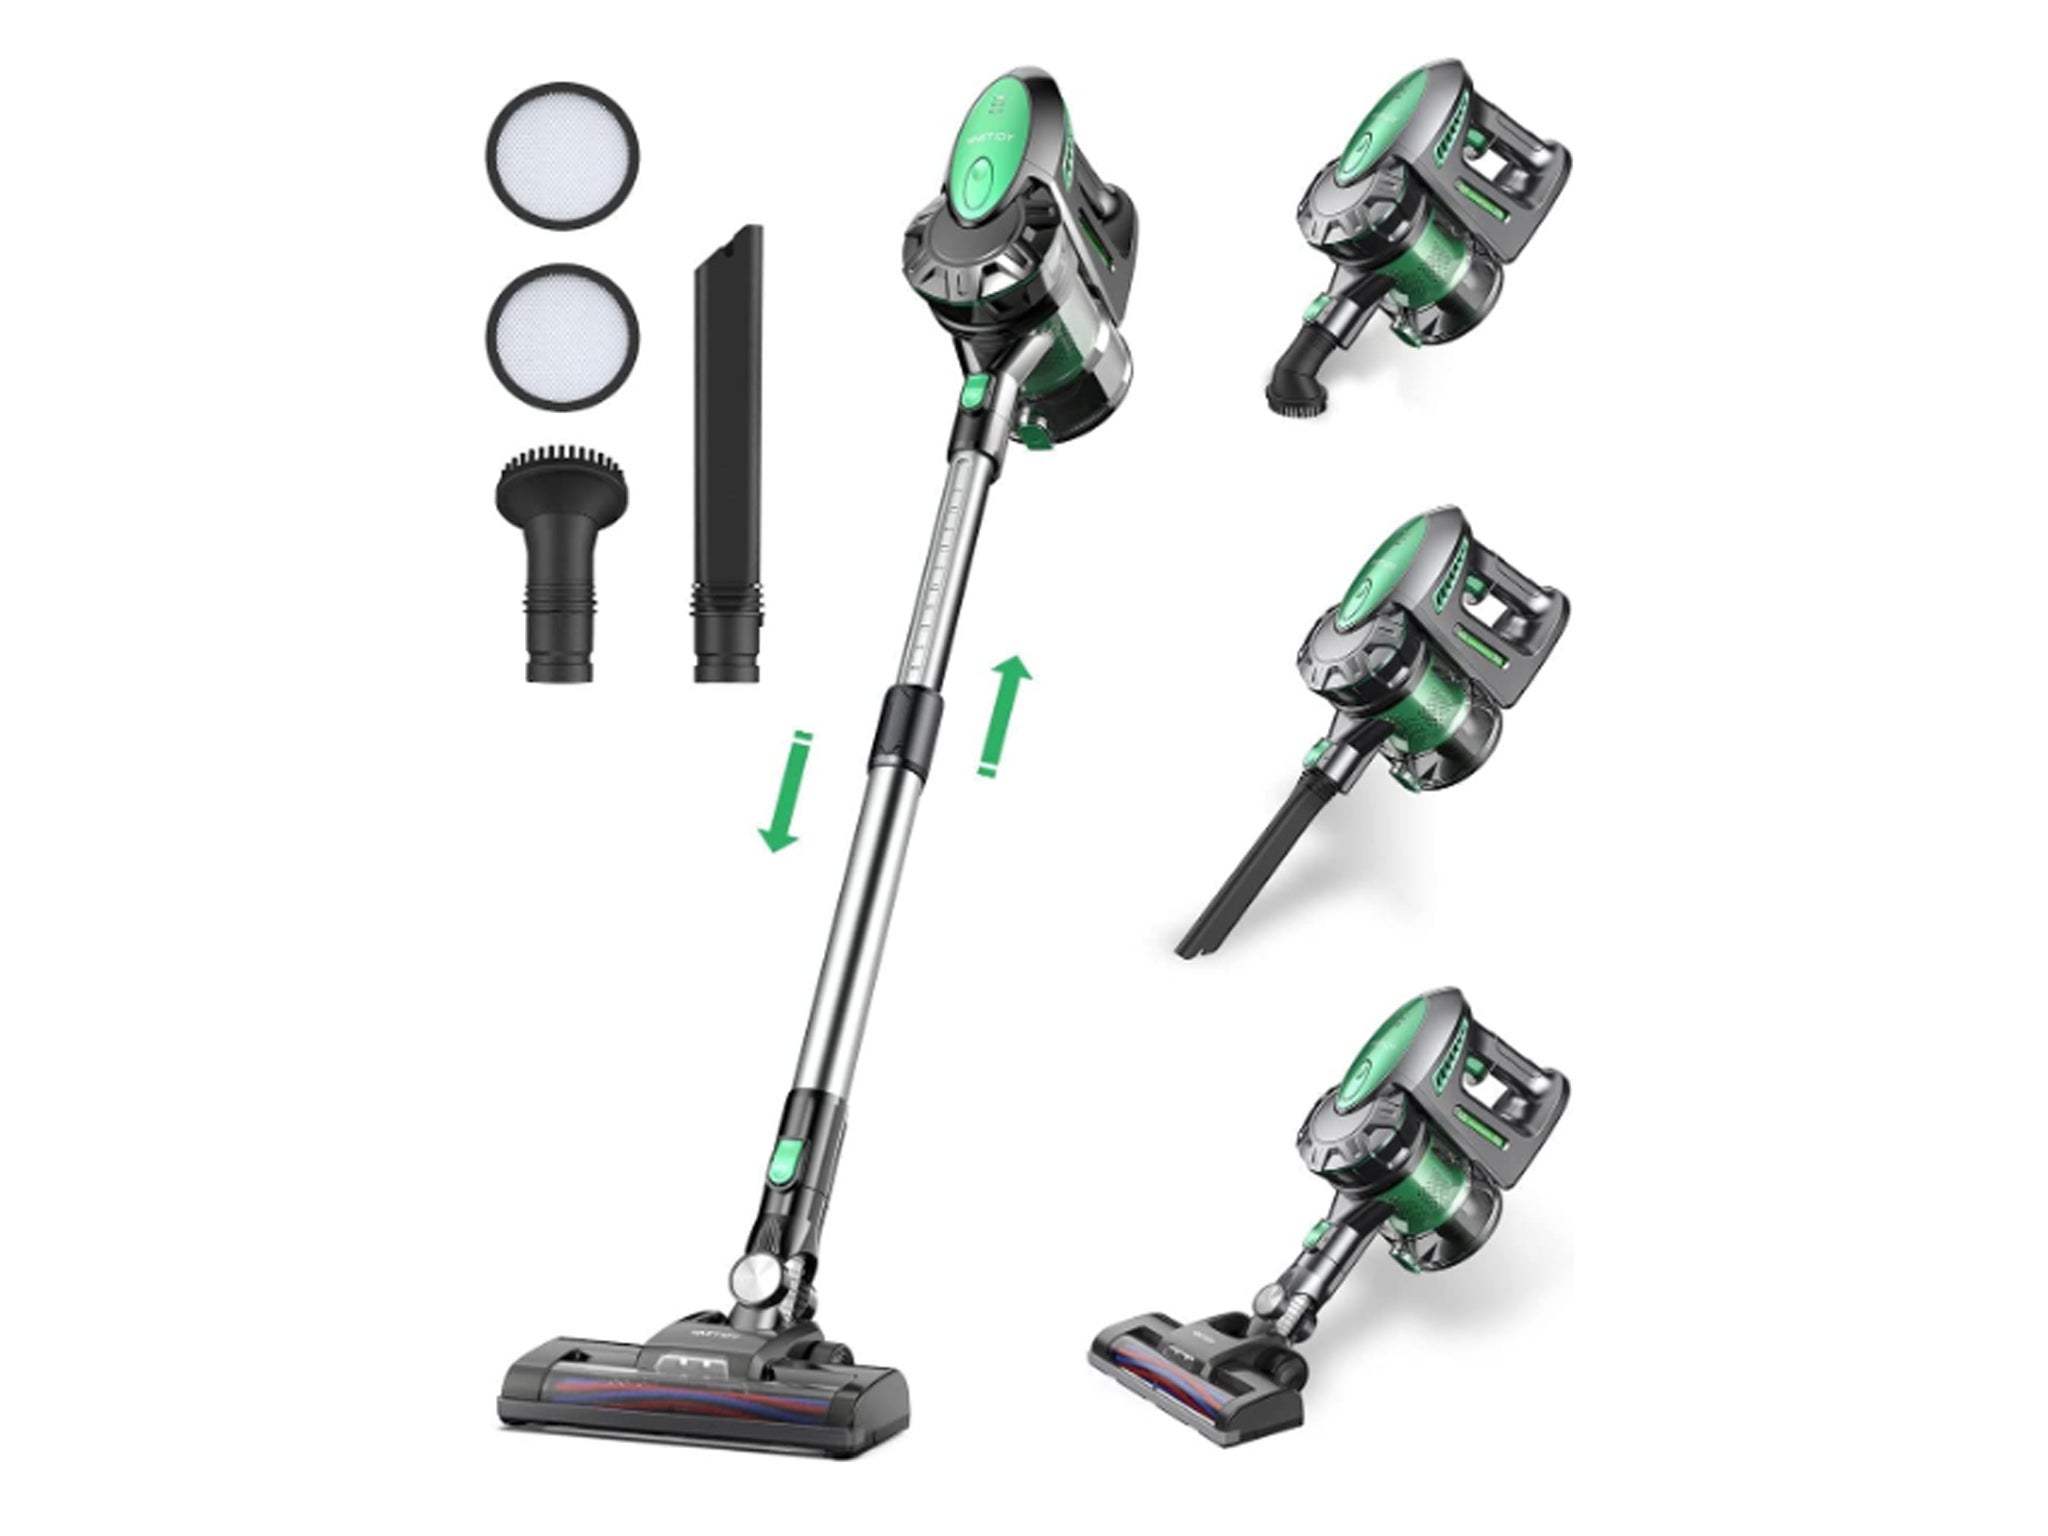 Proscenic P12 review: Dirt can't hide from this cordless vacuum